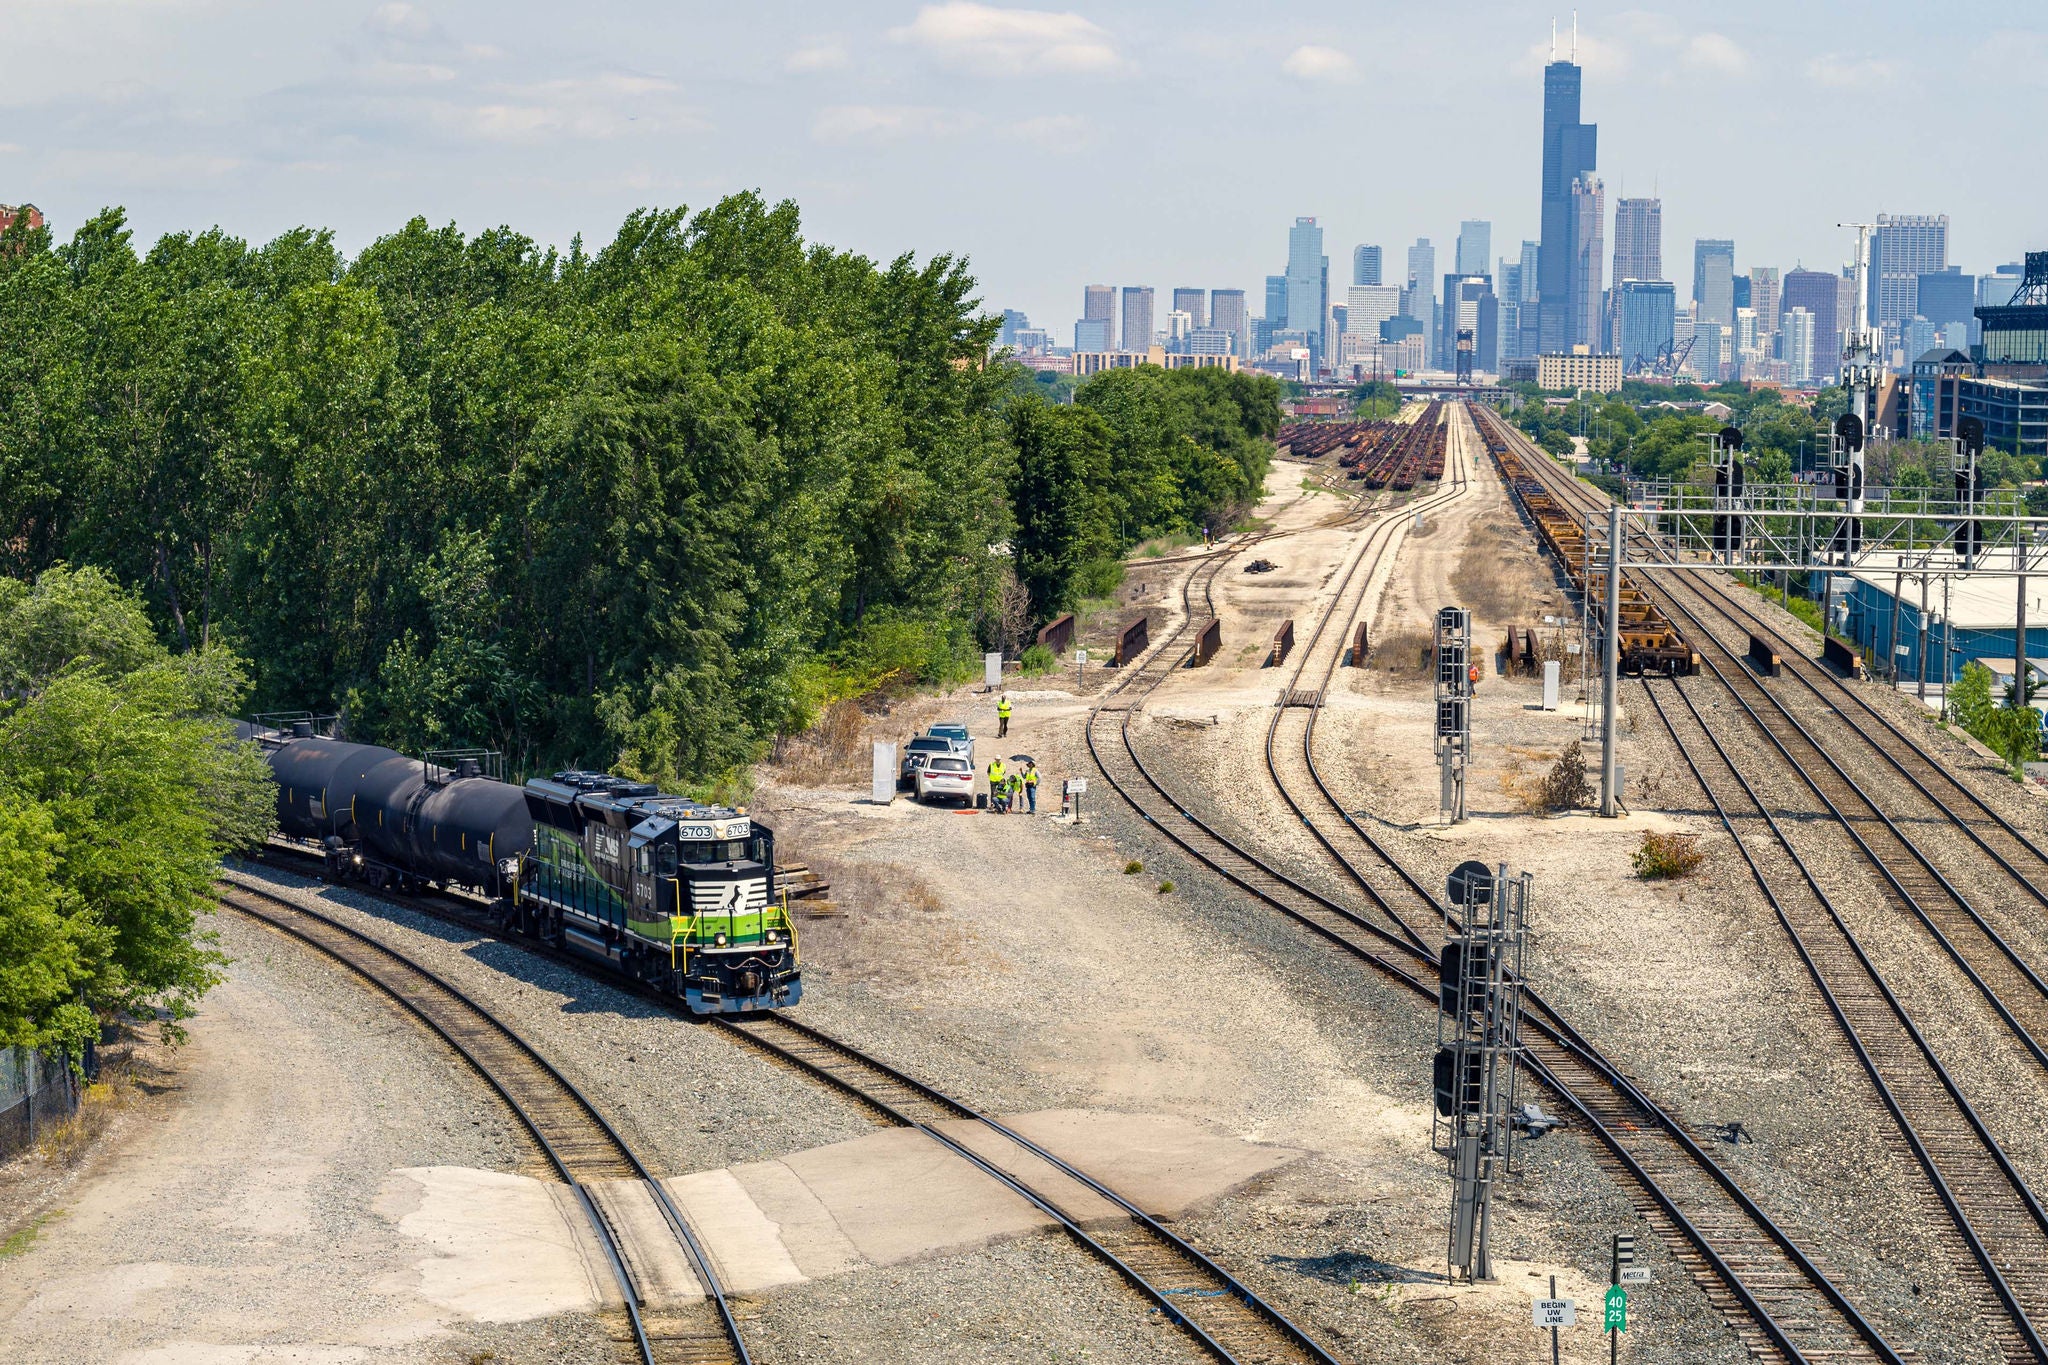 Long shot of train track with a train transporting low carbon fuels coming out of trees on the left and Chicago skyline in back